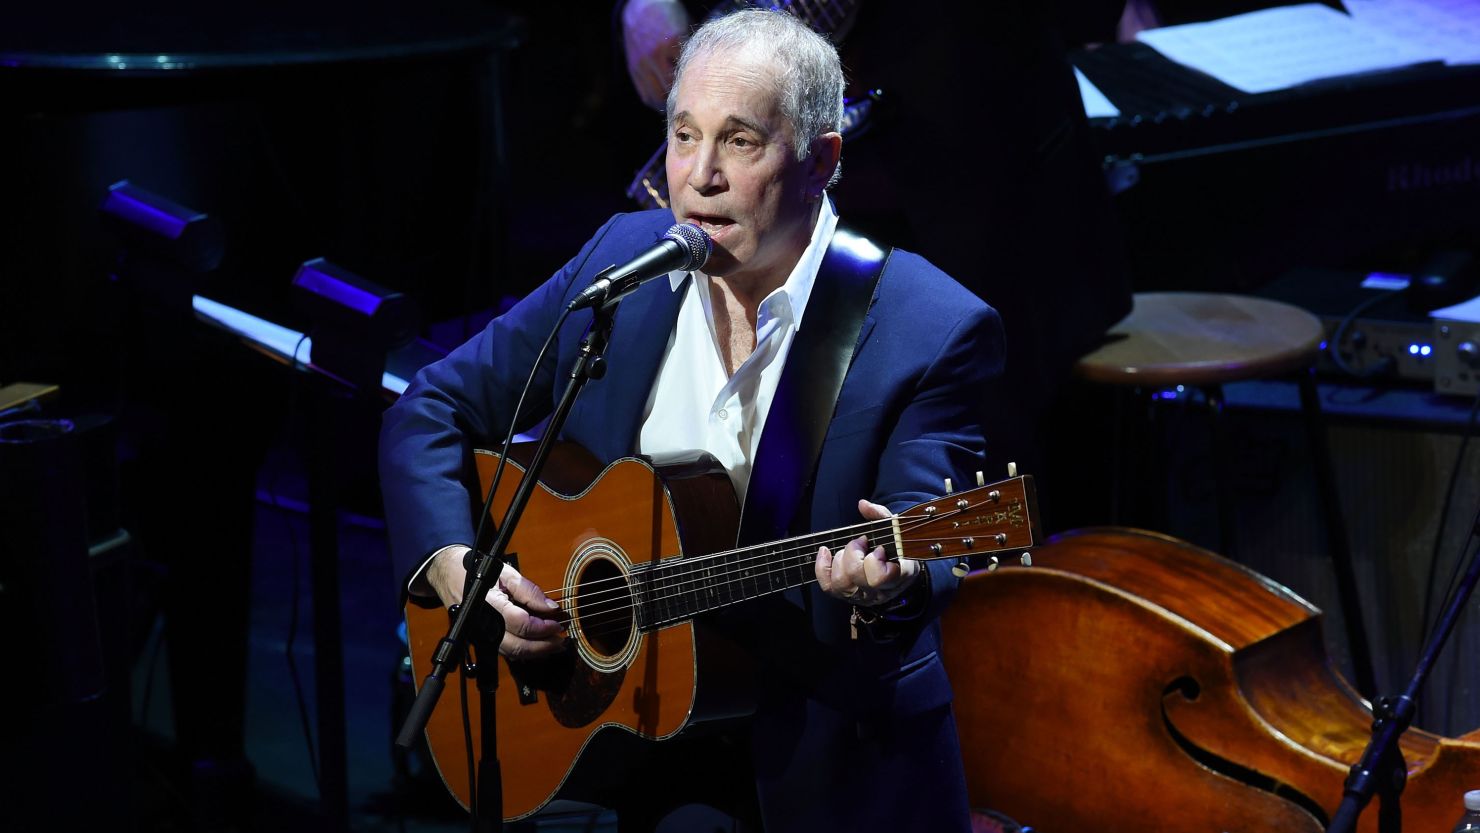 Paul Simon performs onstage during The Nearness Of You Benefit Concert at Frederick P. Rose Hall, Jazz at Lincoln Center on January 20, 2015 in New York City.  